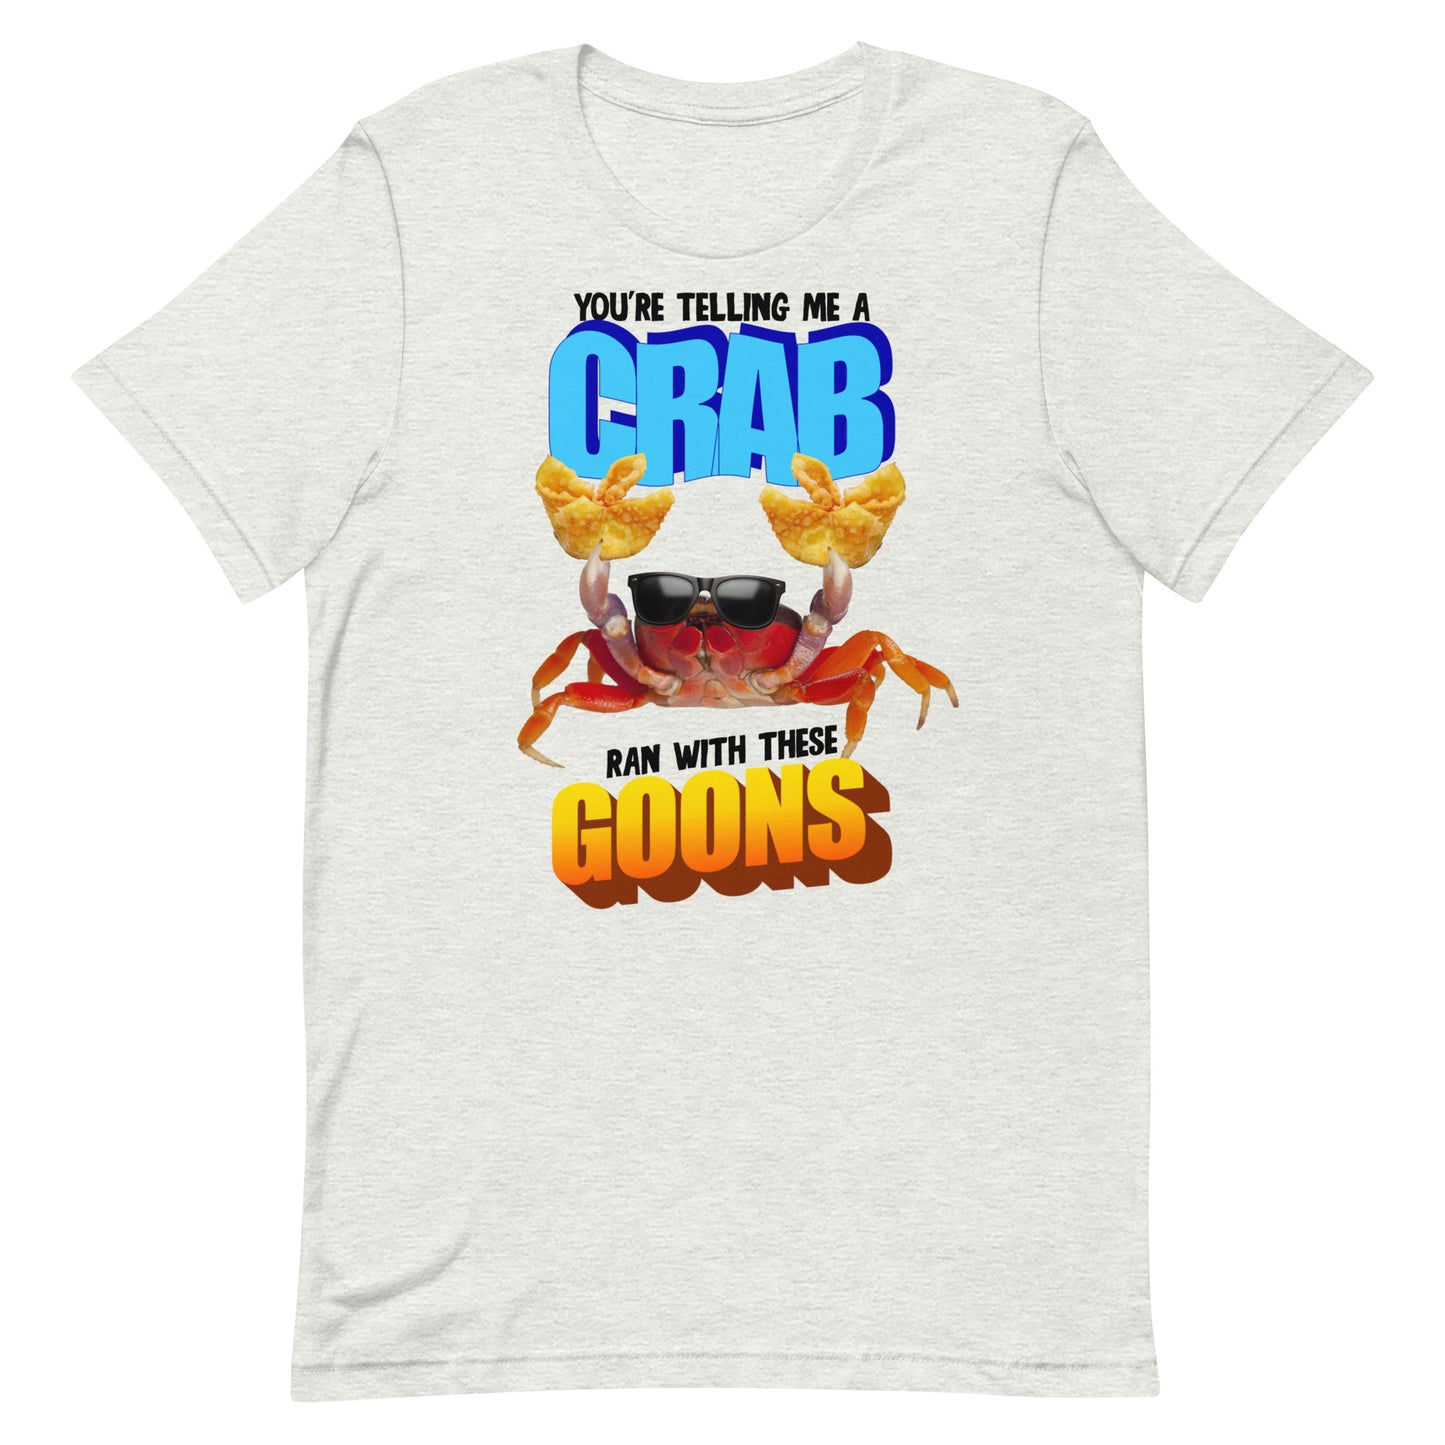 A Crab Ran With These Goons Unisex t-shirt